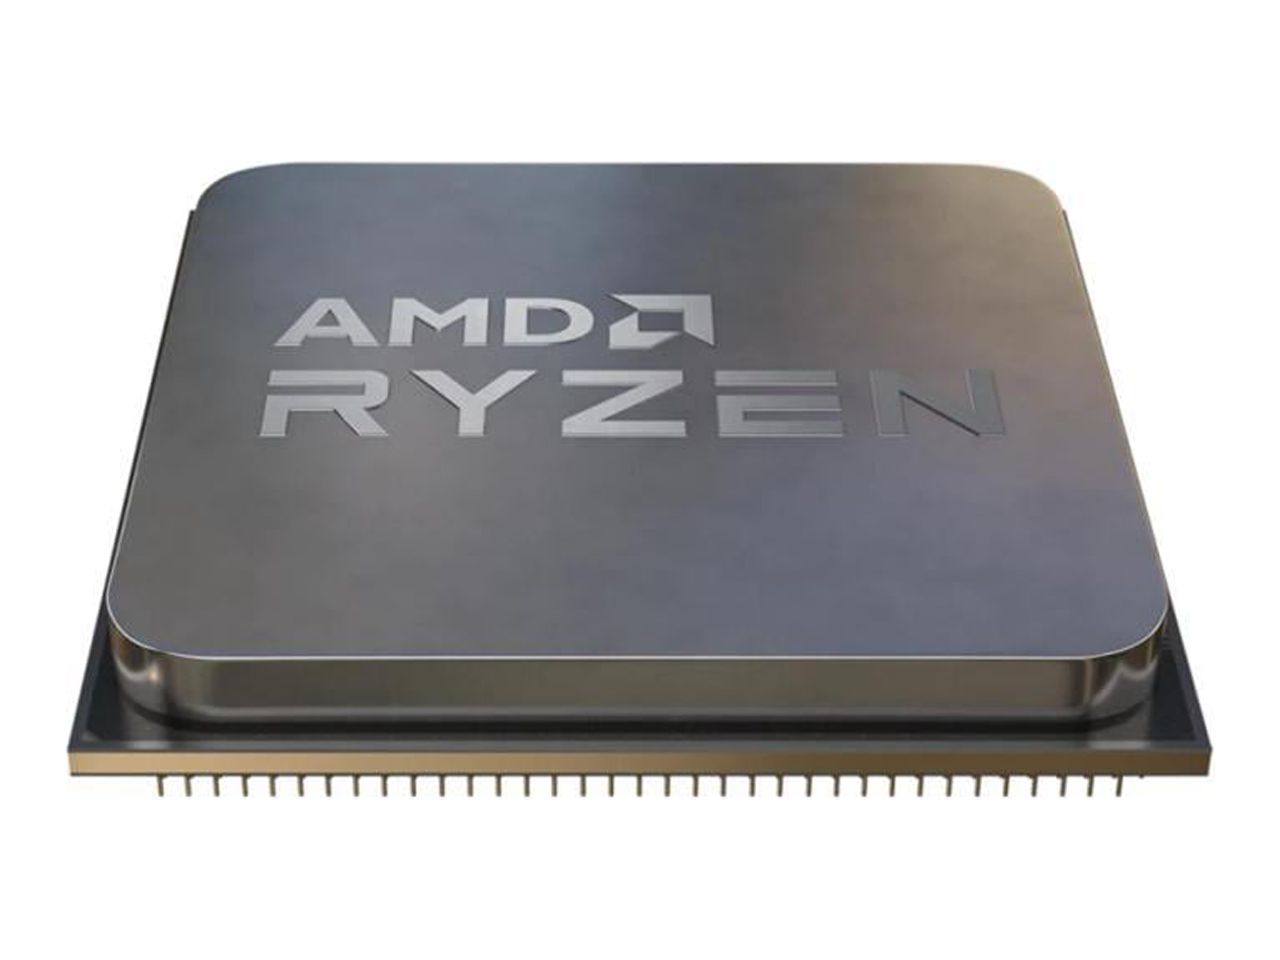 AMD Ryzen 3 4100 3.8Ghz 4-Core AM4 Processor with Wraith Stealth Cooler - 100-100000510BOX - image 5 of 10